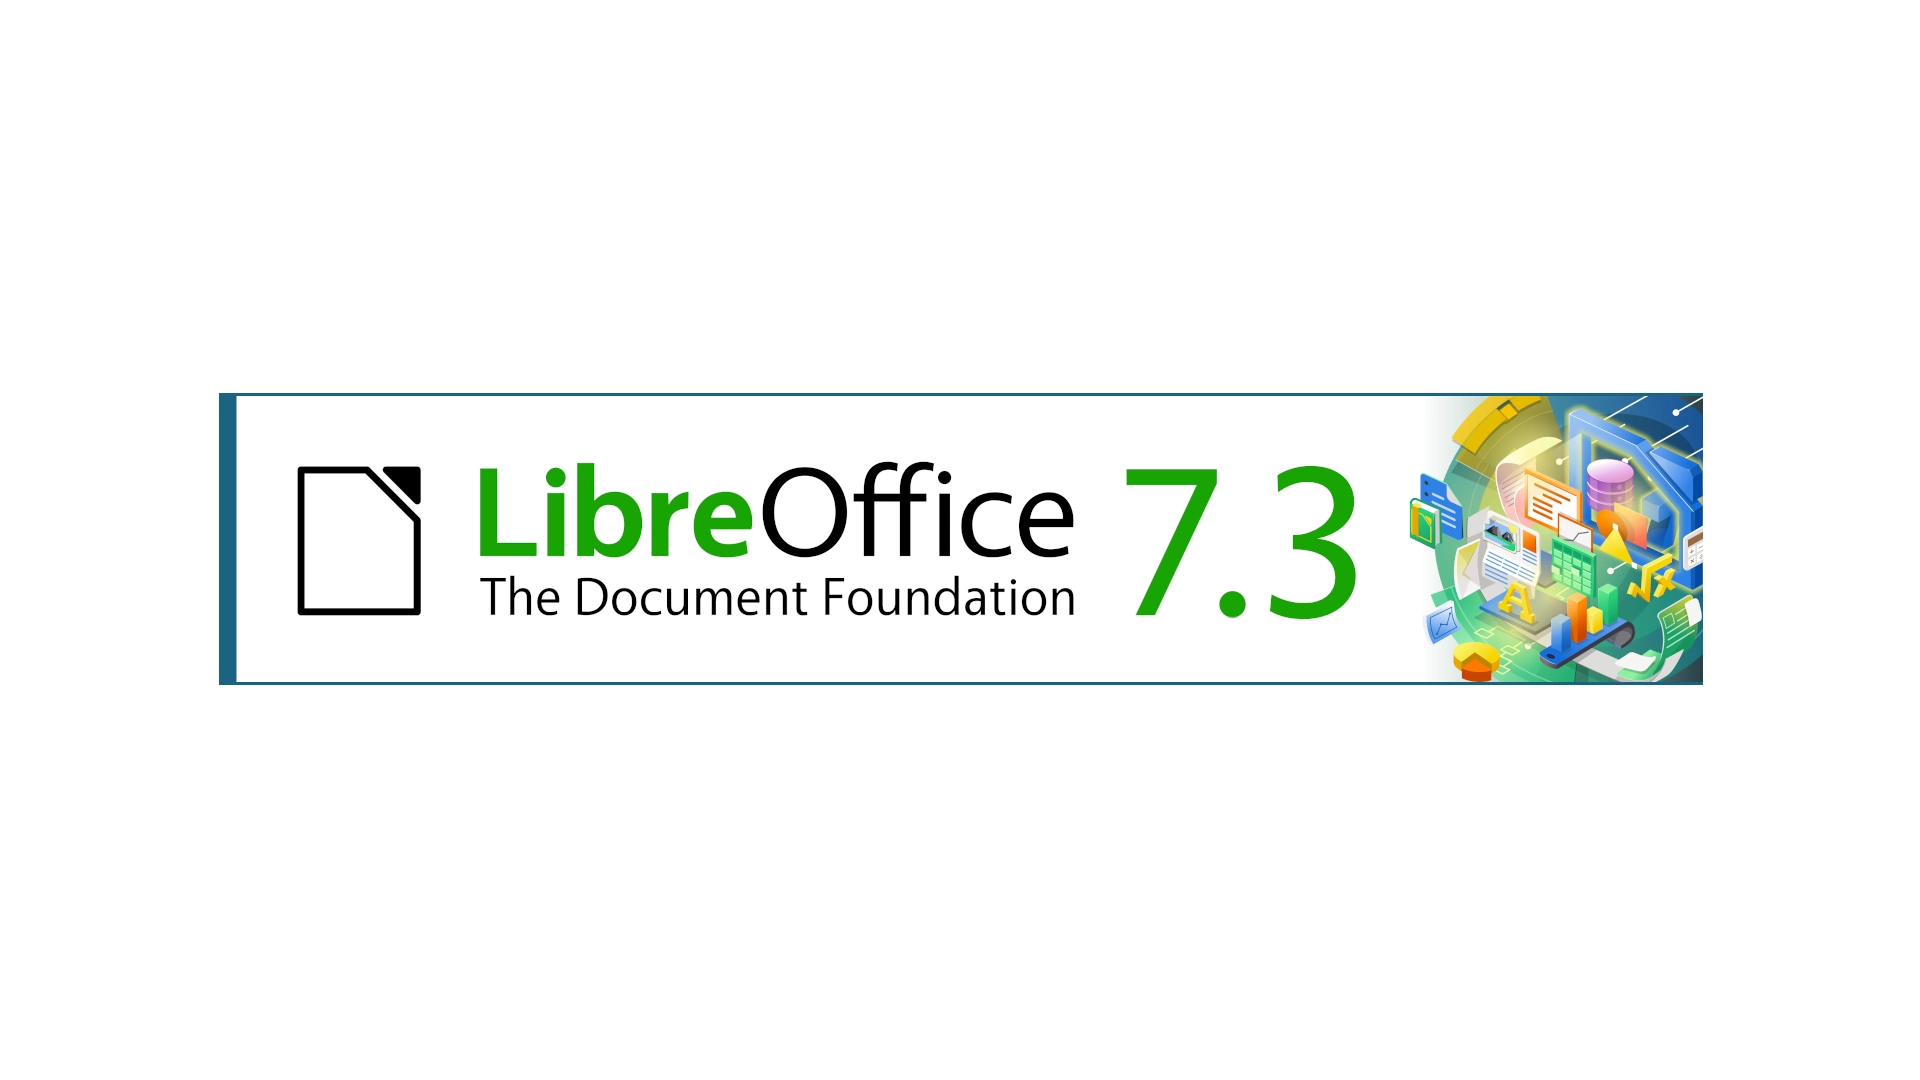 LibreOffice 7.3.3 Office Suite Is Now Available for Download with 88 Bug Fixes